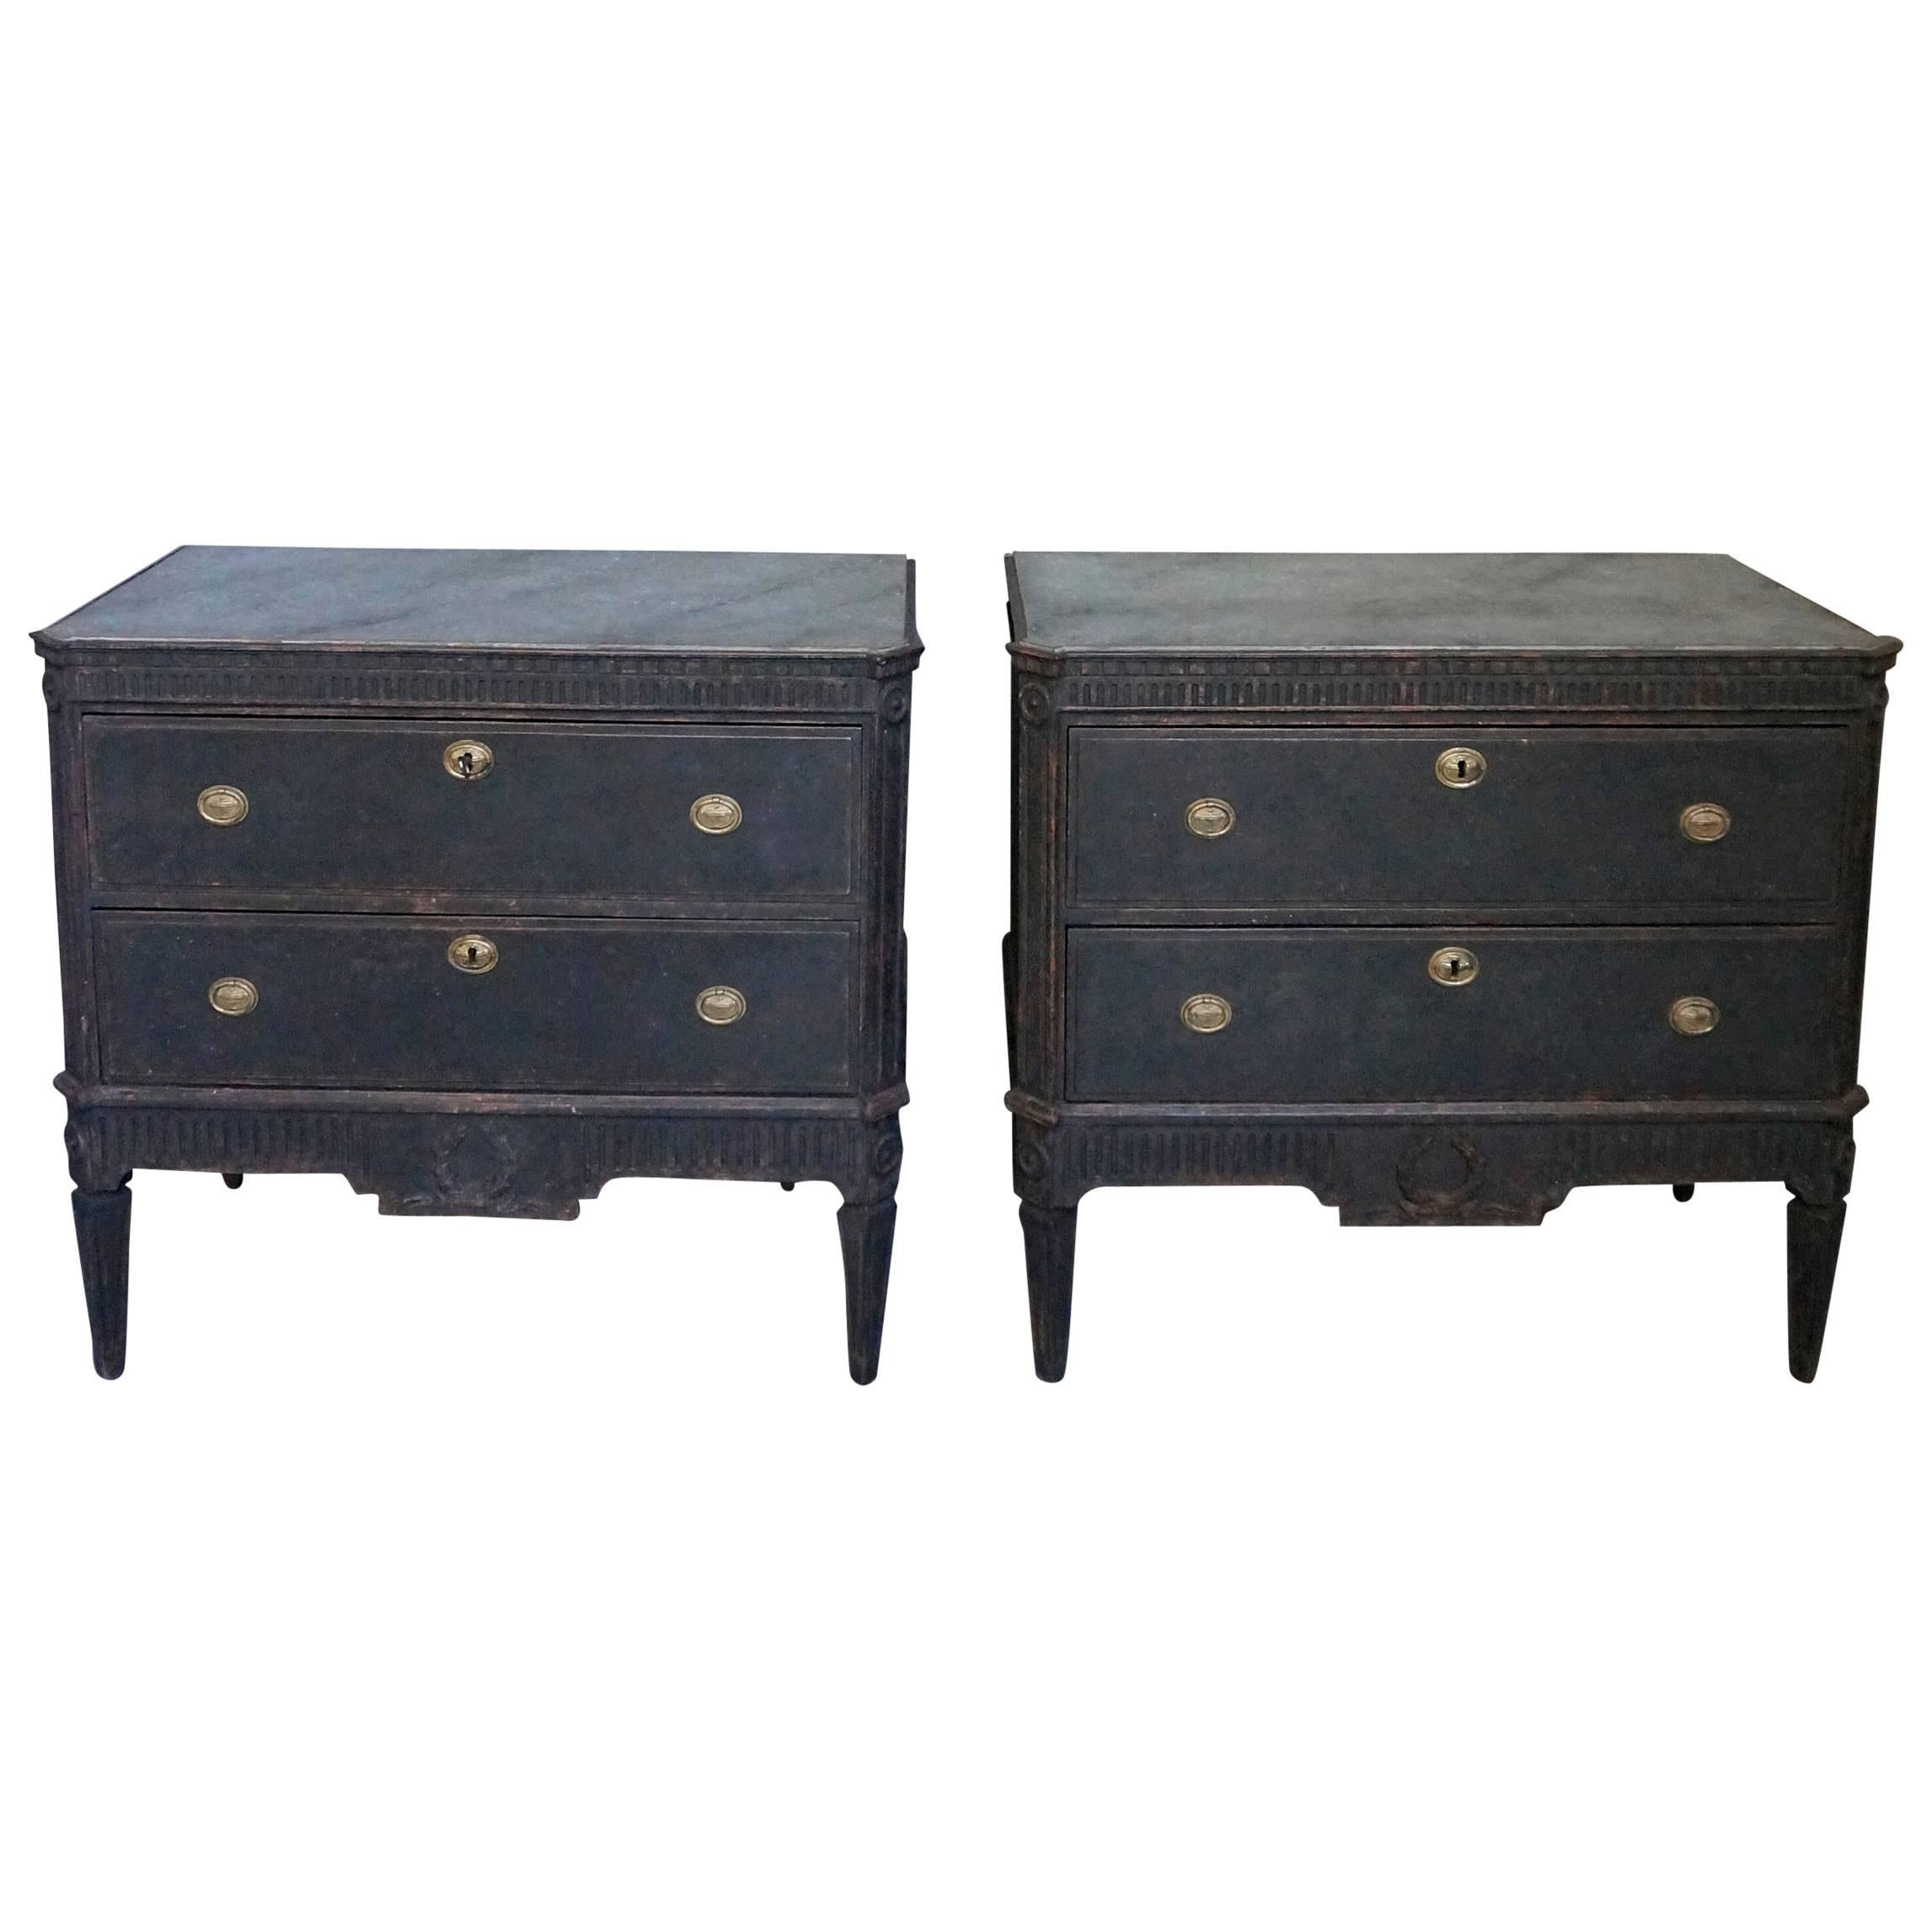 Pair of Black Painted Gustavian Style Commodes